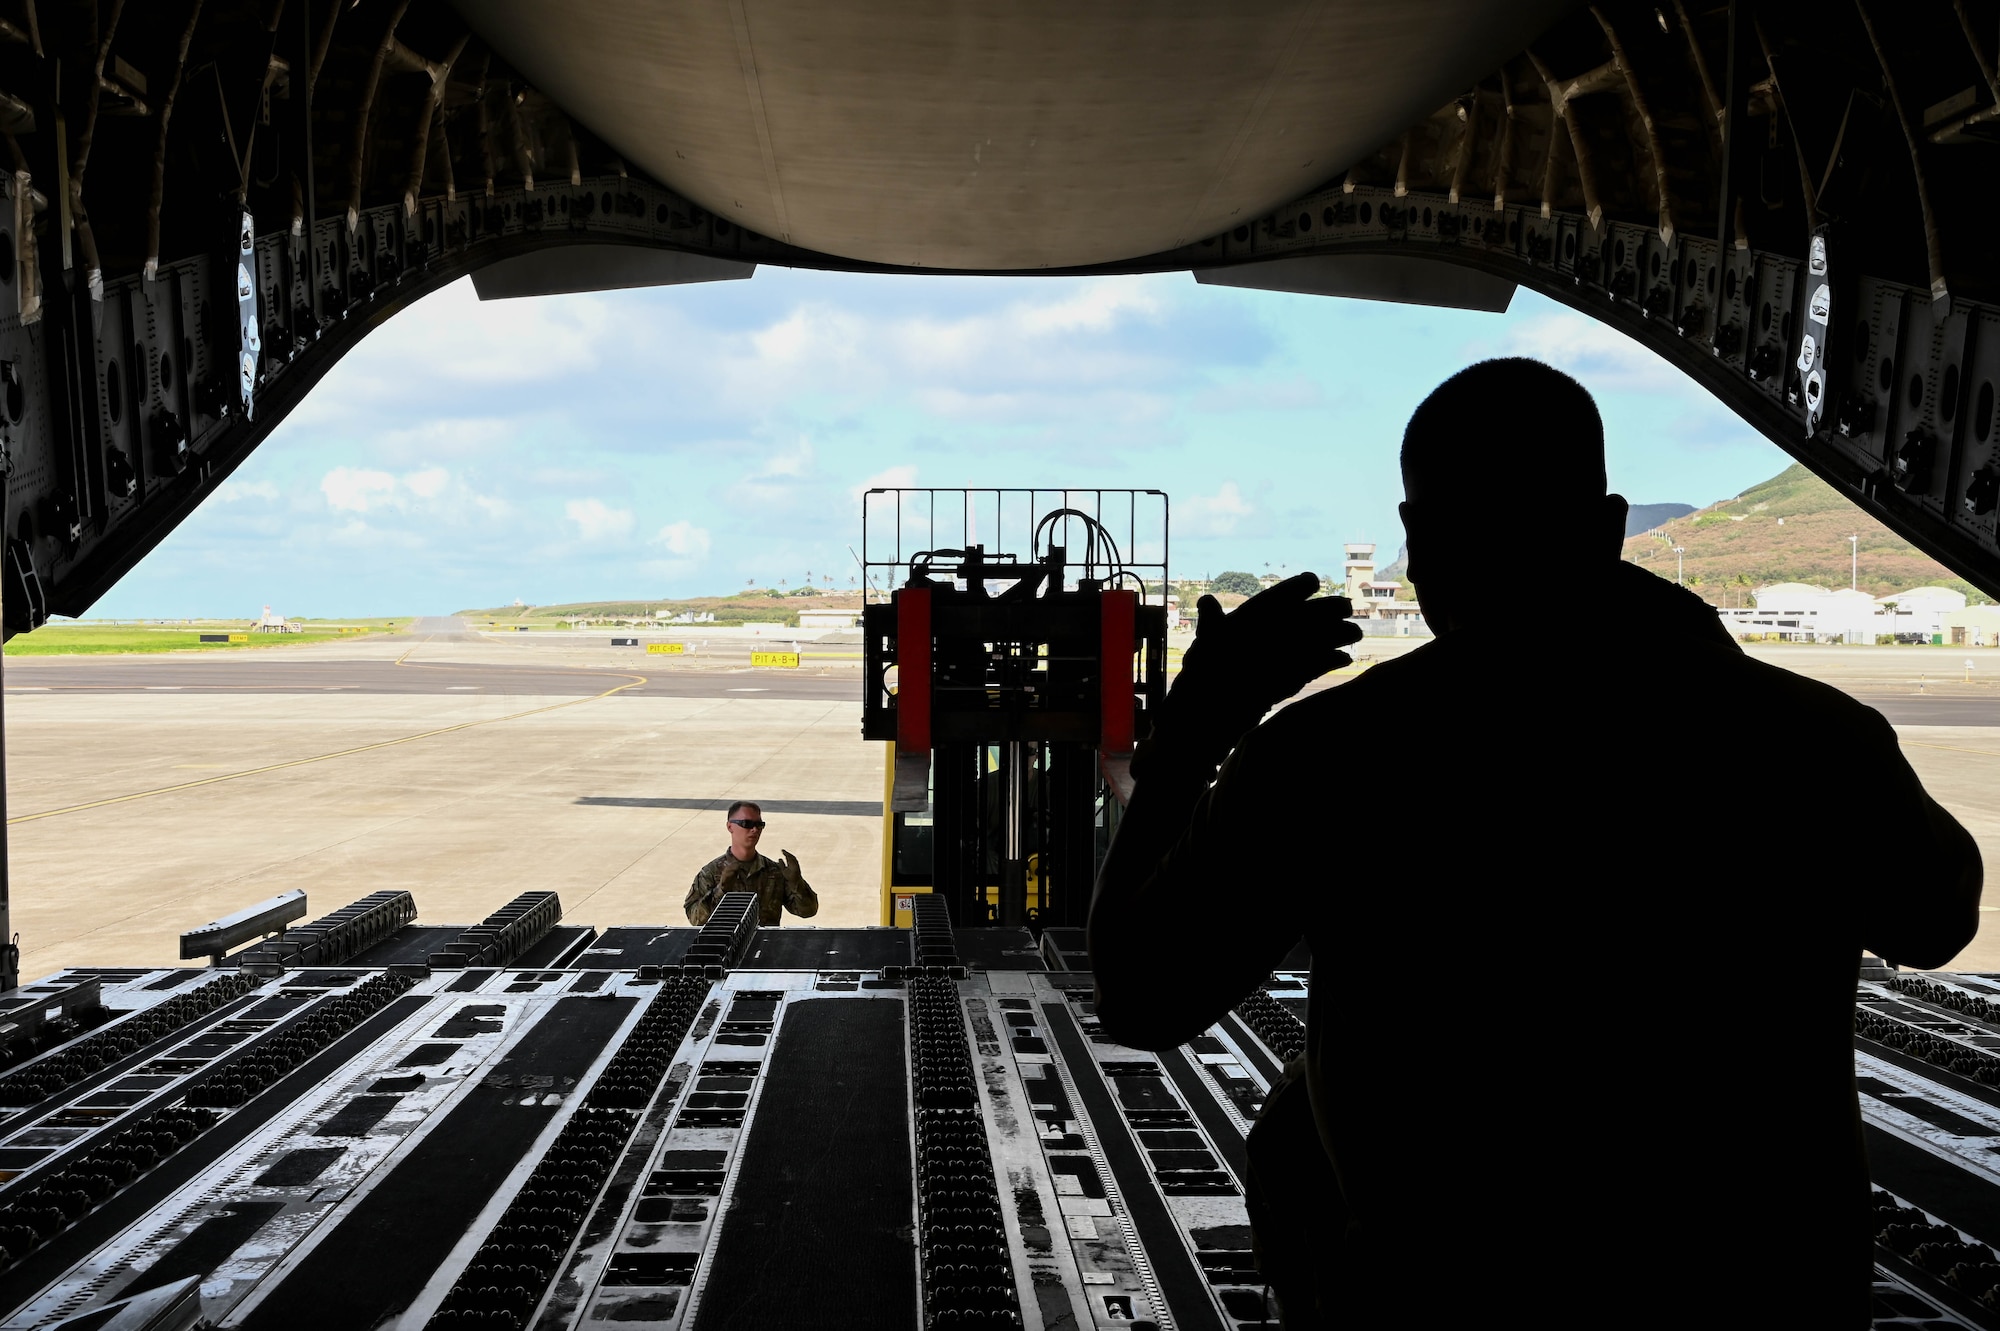 U.S. Air Force Tech. Sgt. James Delgadillo, 58th Airlift Squadron instructor loadmaster, directs a forklift at Marine Corps Base Hawaii, Sept. 9, 2021. More than 30,000 pounds of MQ-9 Reaper assets were loaded in support of exercise Agile Combat Employment Reaper. (U.S. Air Force photo by Airman 1st Class Kayla Christenson)